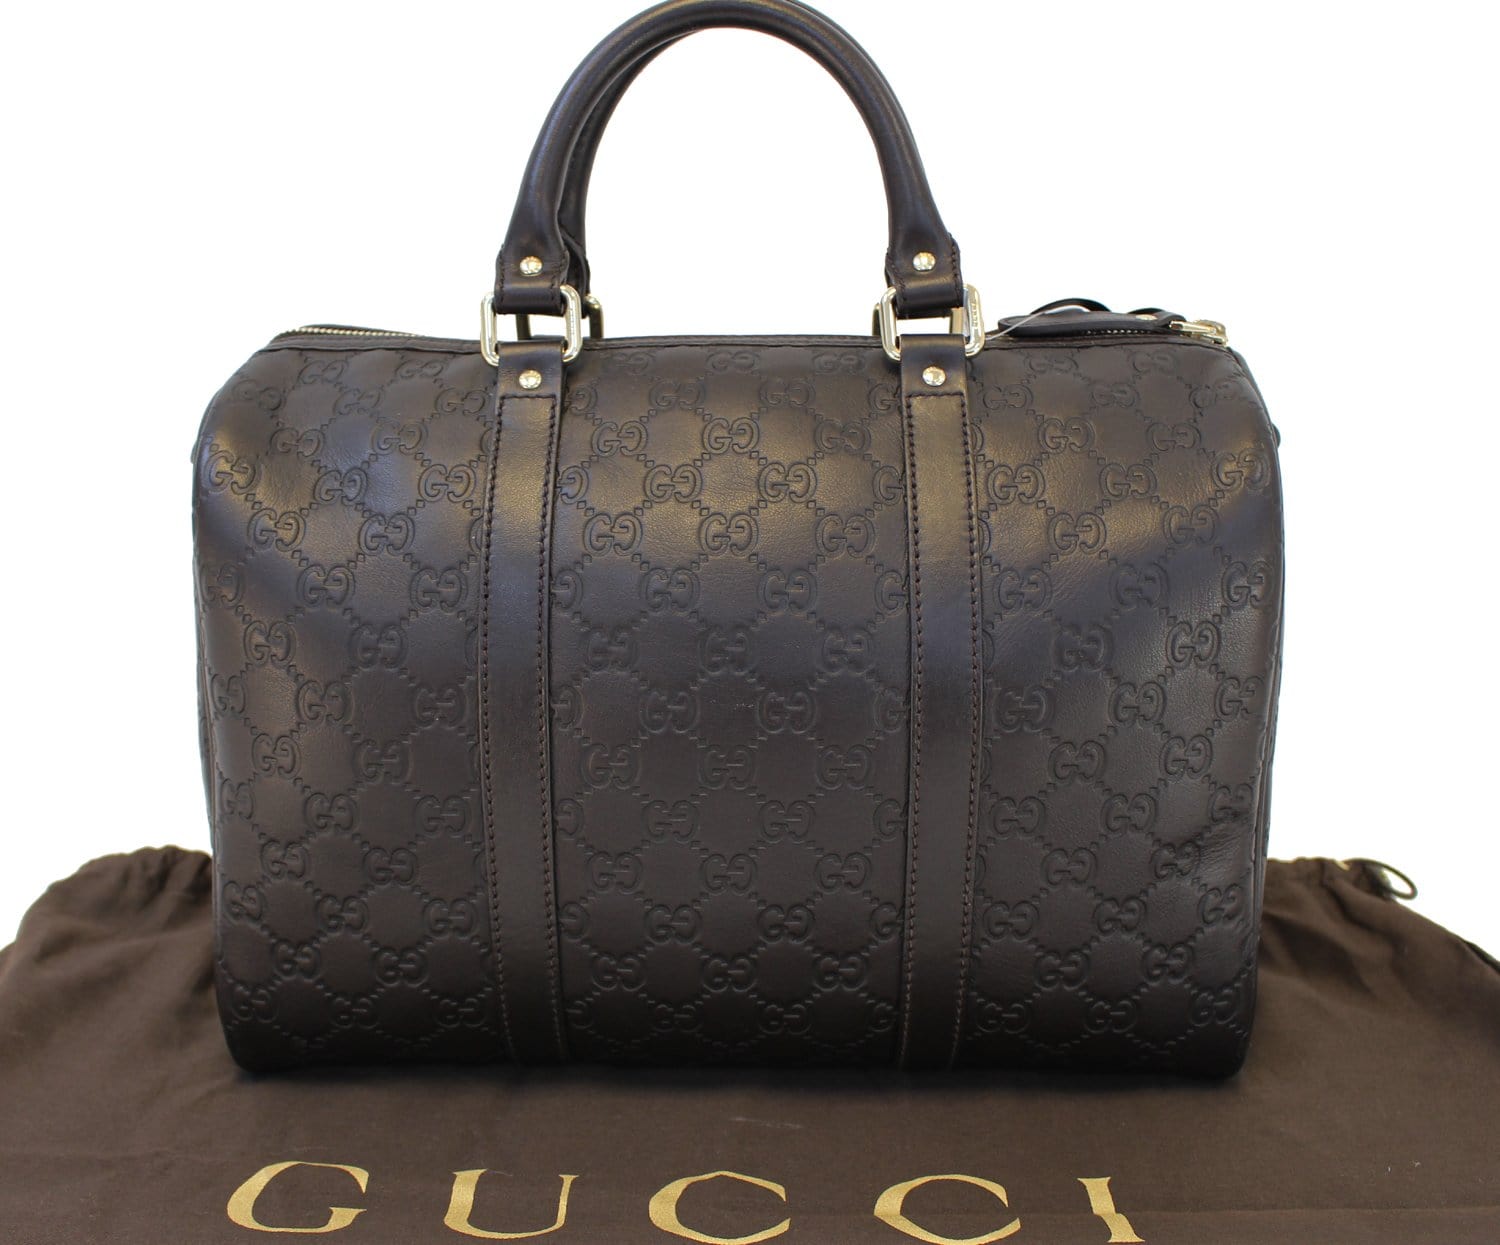 Authentic Gucci Large Black Leather Embossed Speedy Bag for